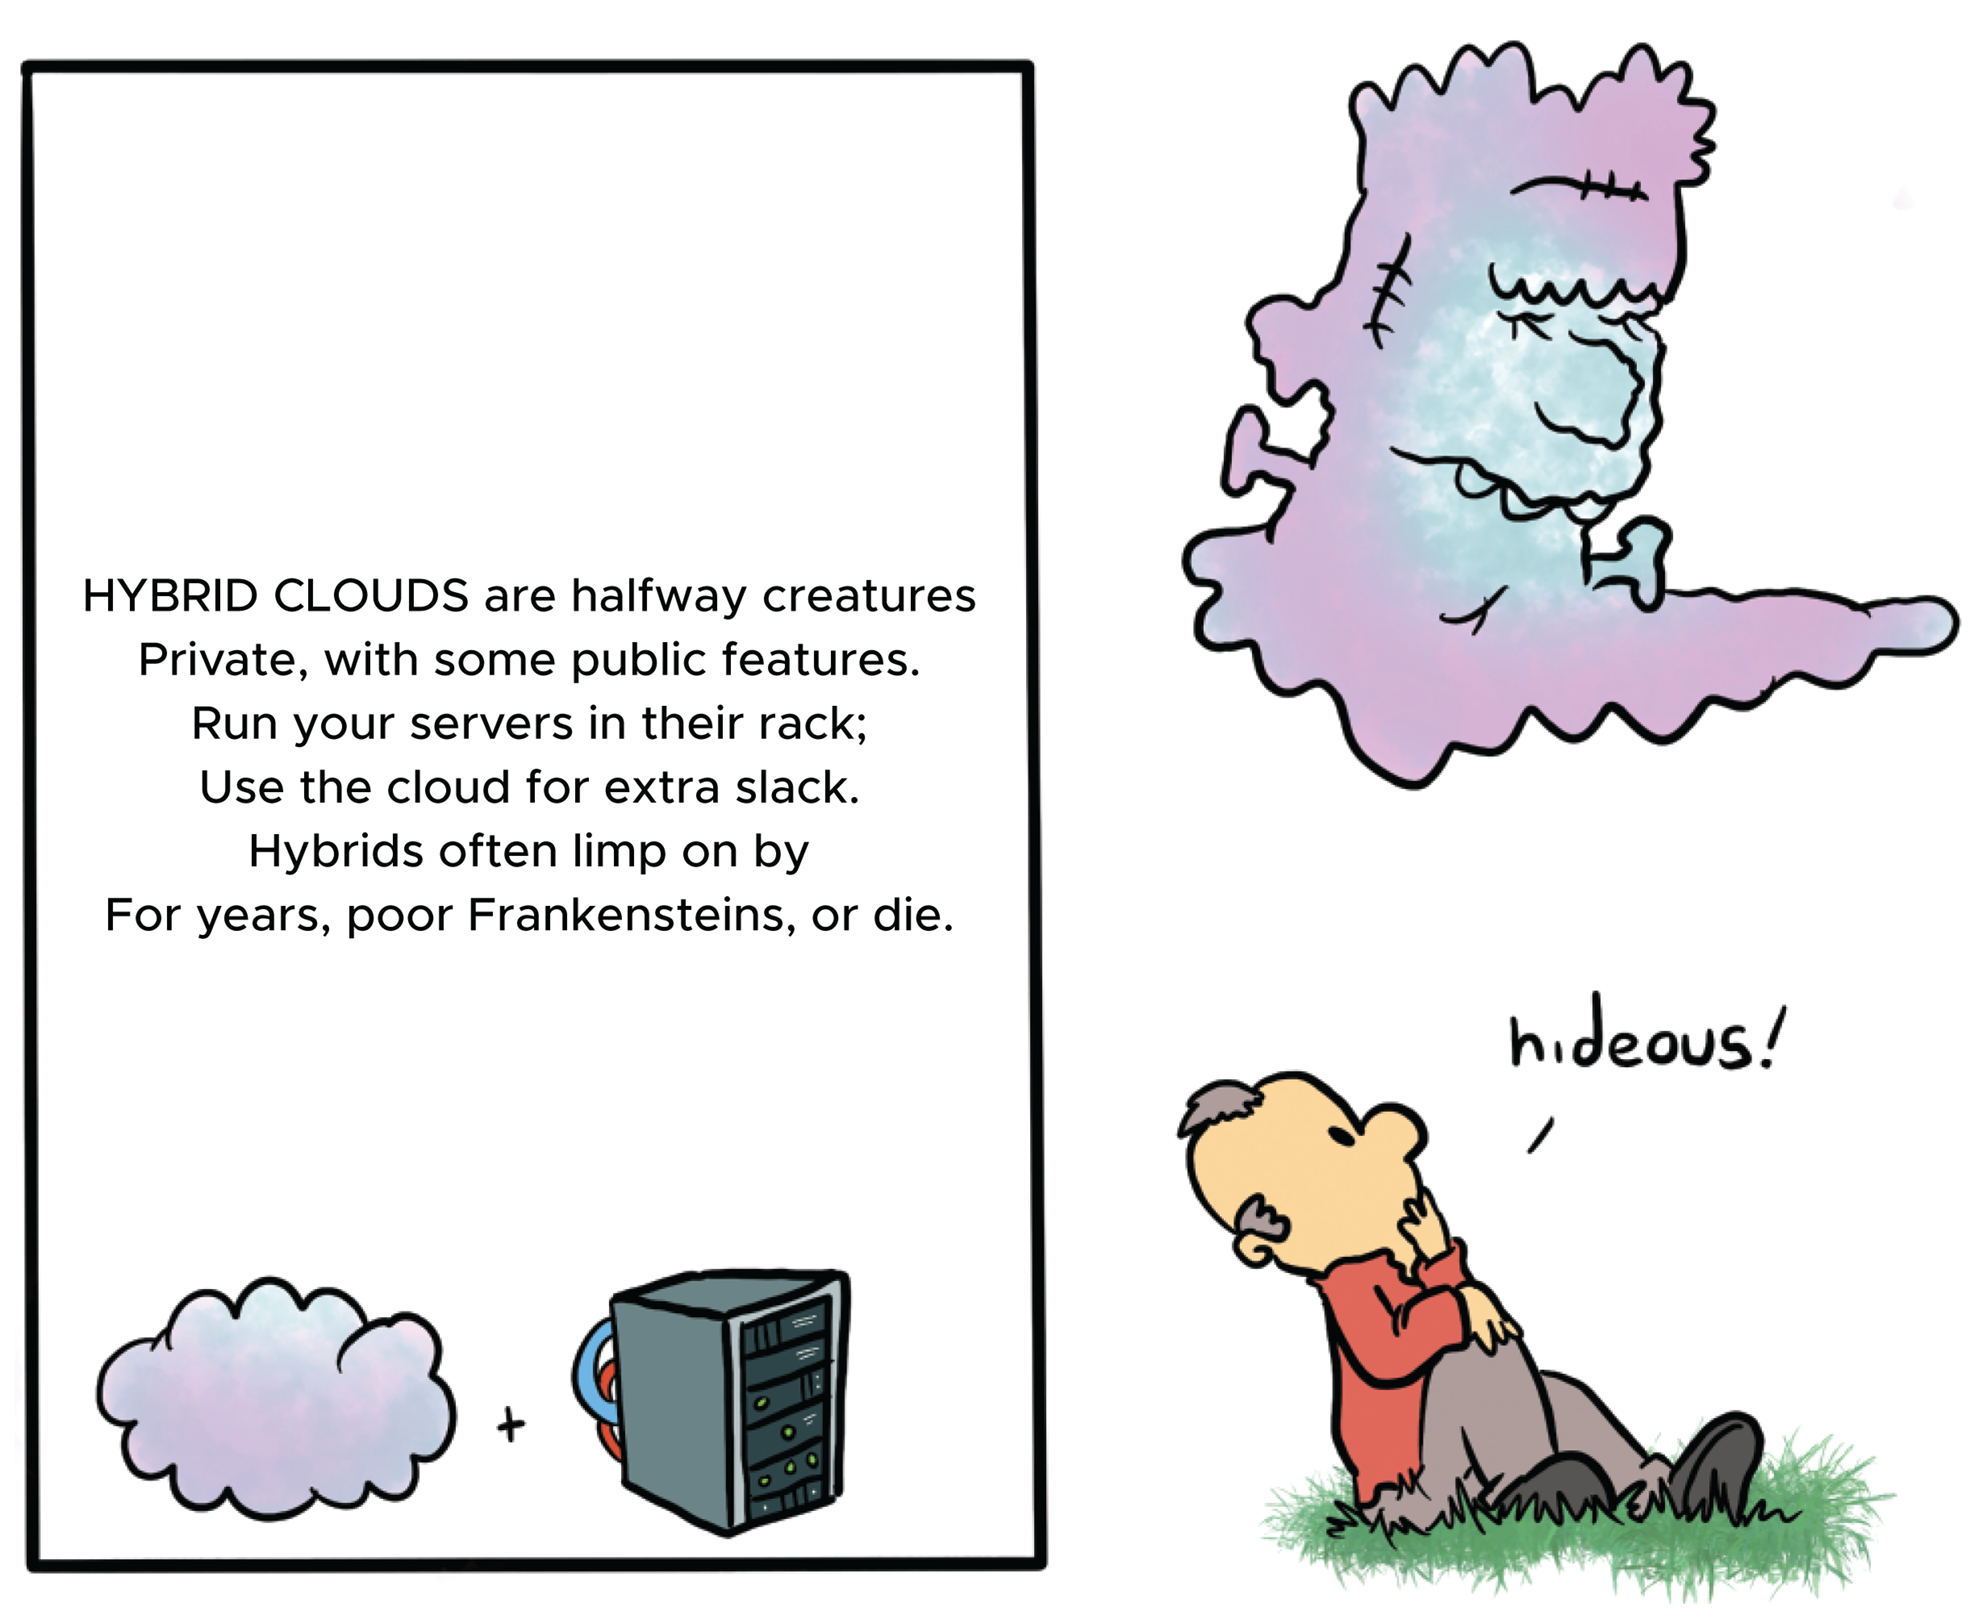 Cartoon illustration of a man feeling hedeous due to hybrid clouds.